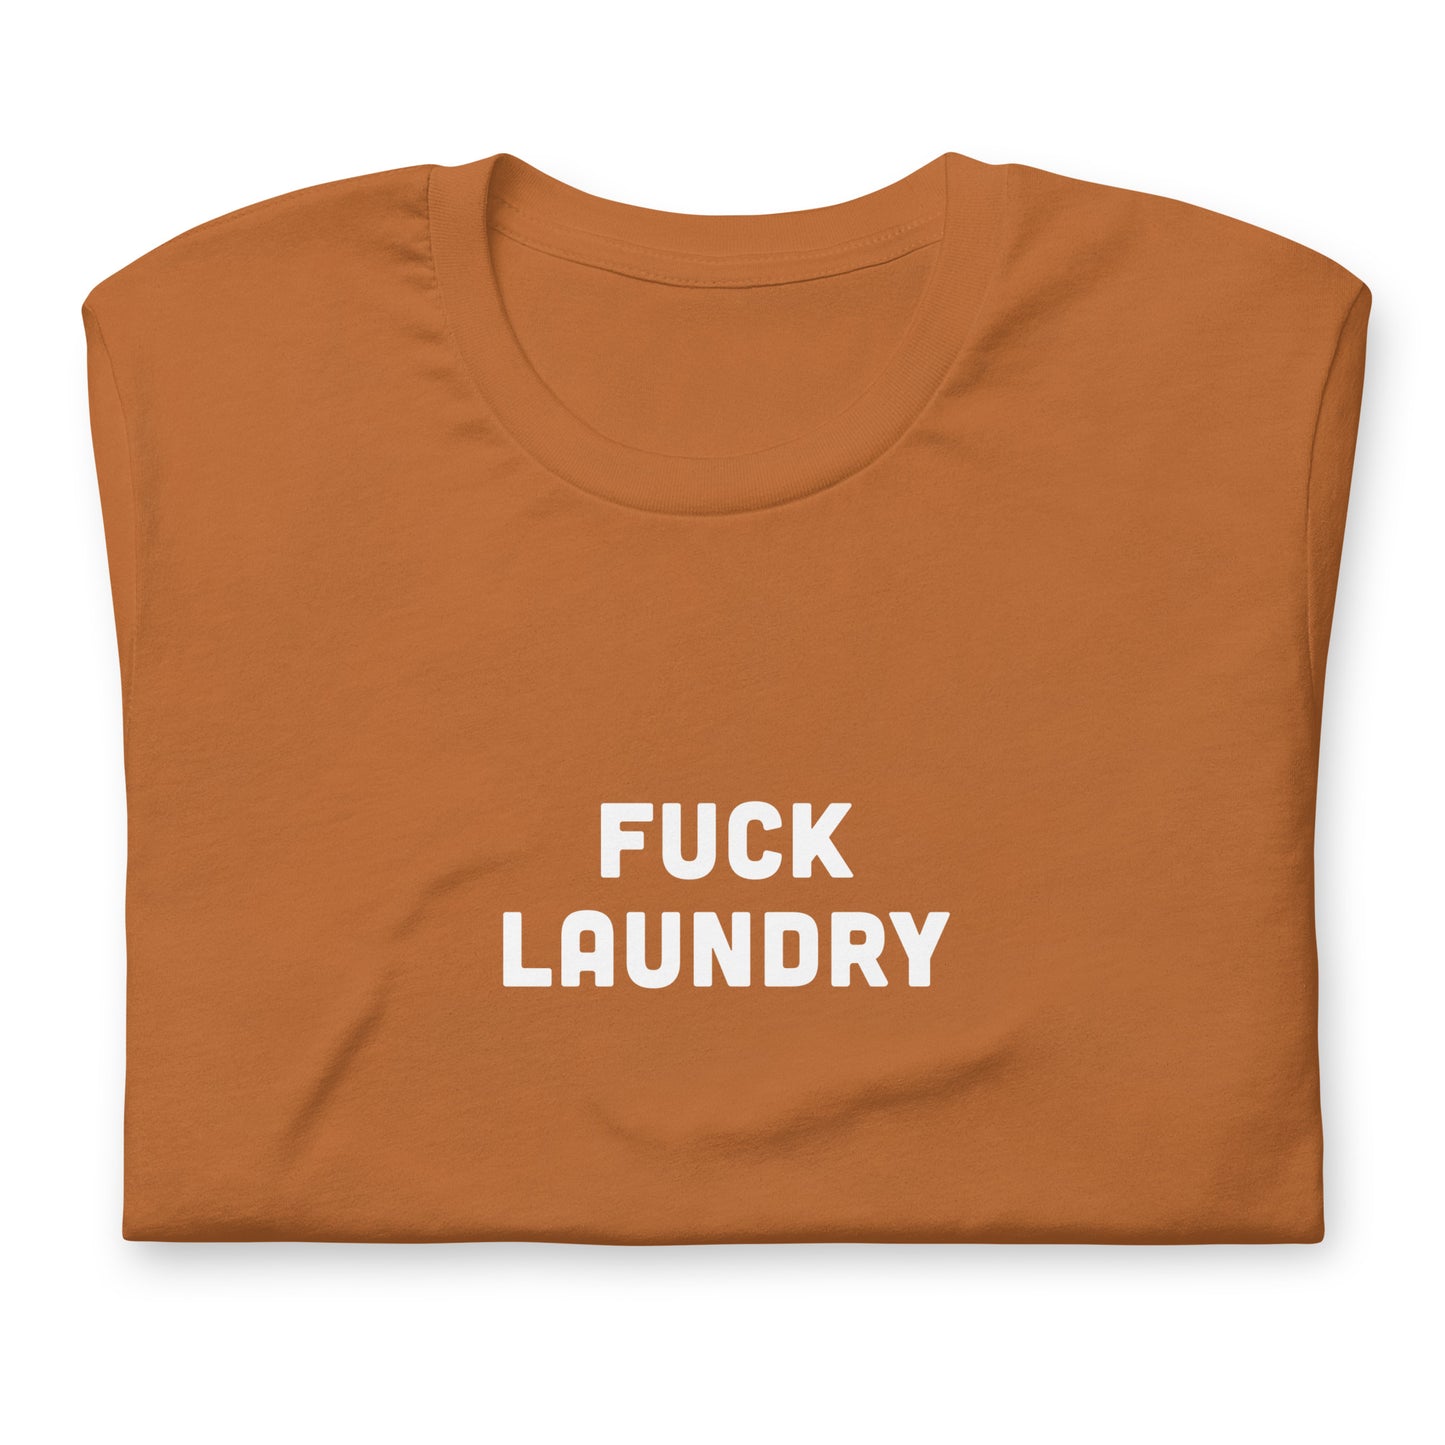 Fuck Laundry T-Shirt Size XL Color Navy